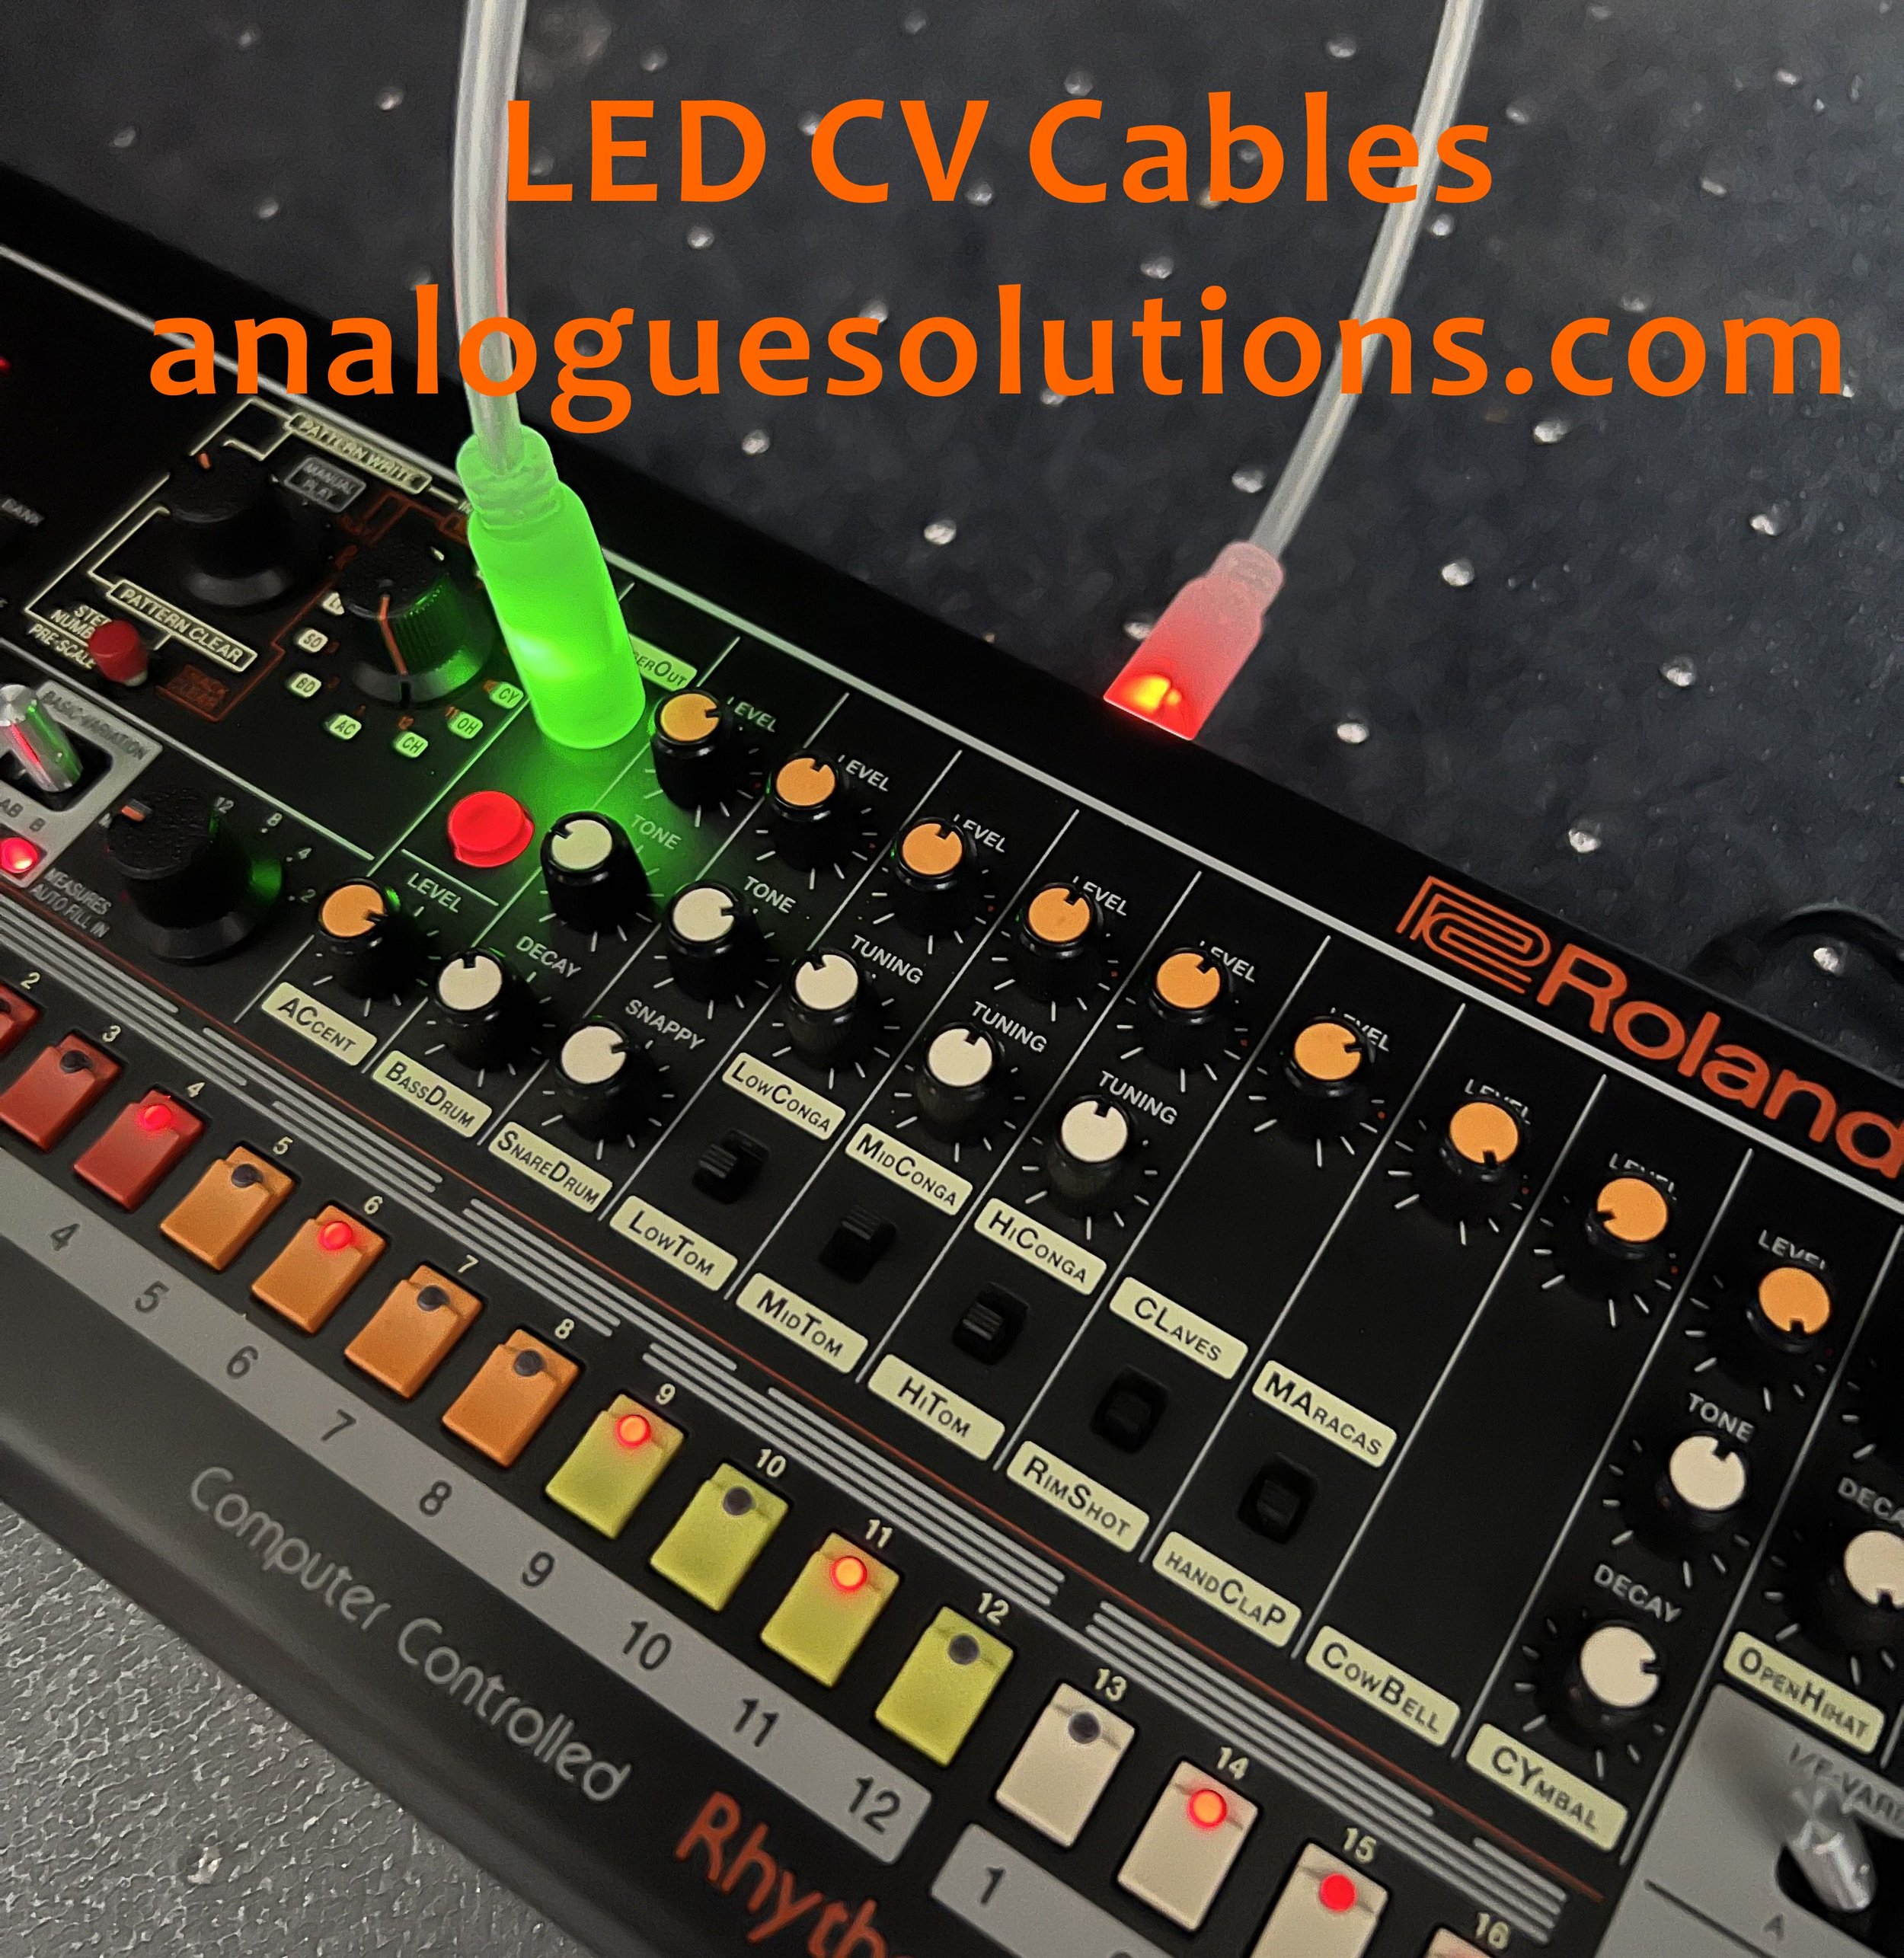 analogue solutions led cv cables roland tr08 tr808.JPG